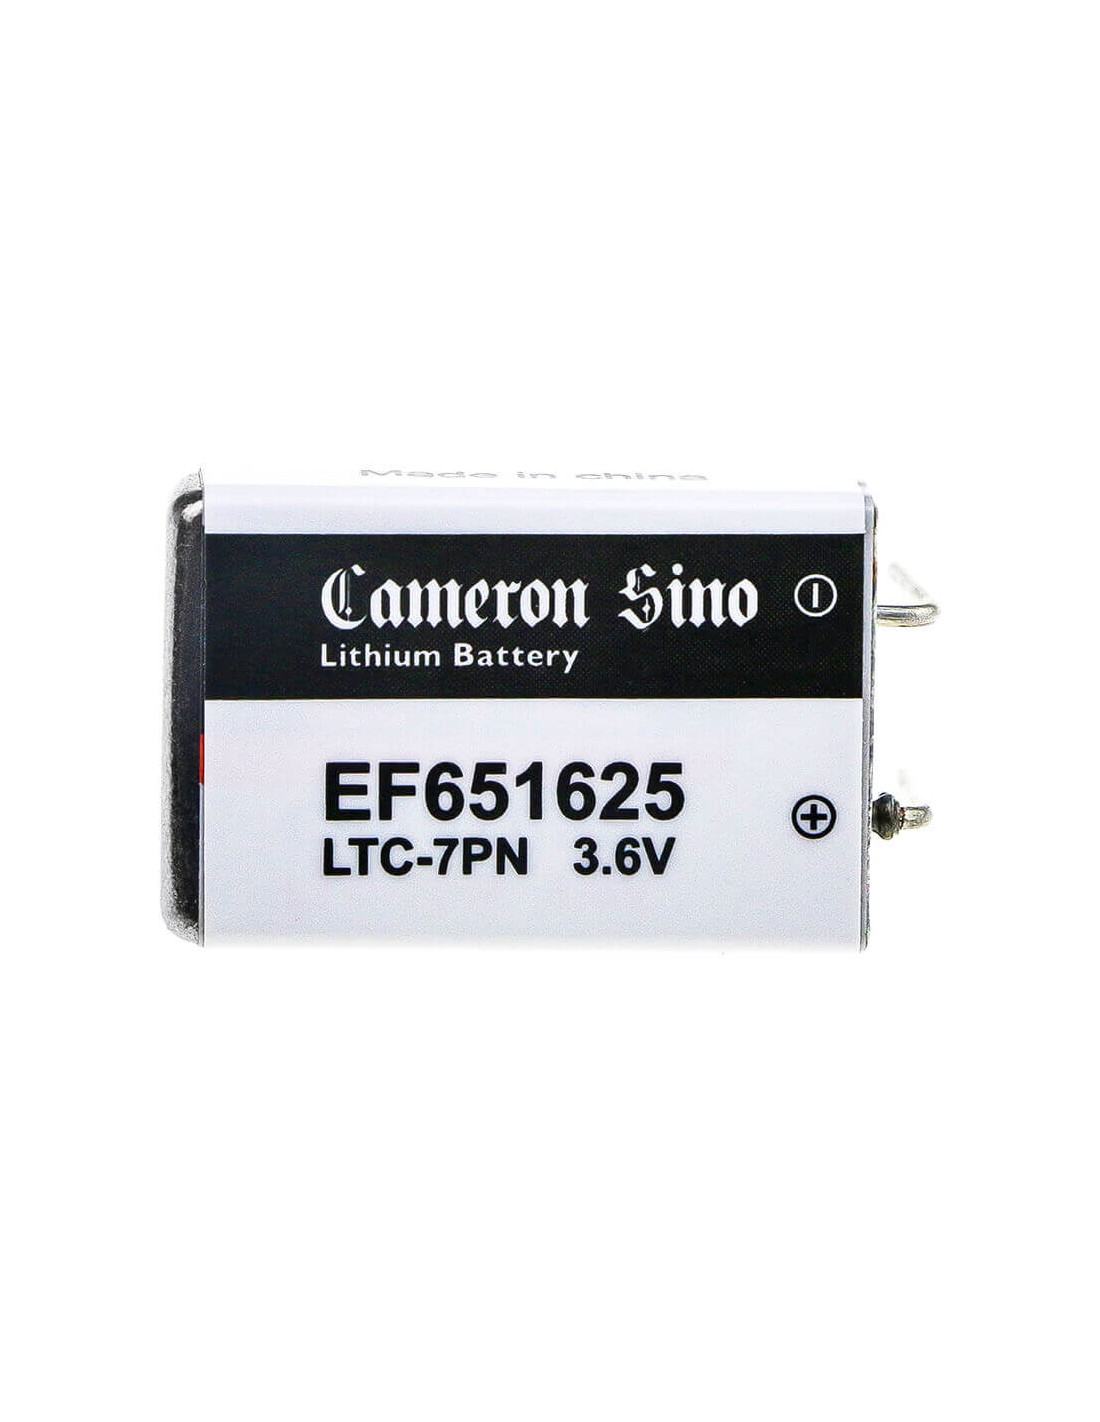 Battery for Cameron Sino Ef651625 Primary Lithium Cell Battery, Li-socl2 Ef651625 Cs-ef651625, Voltage: 3.6v Nominal Capacity: 0